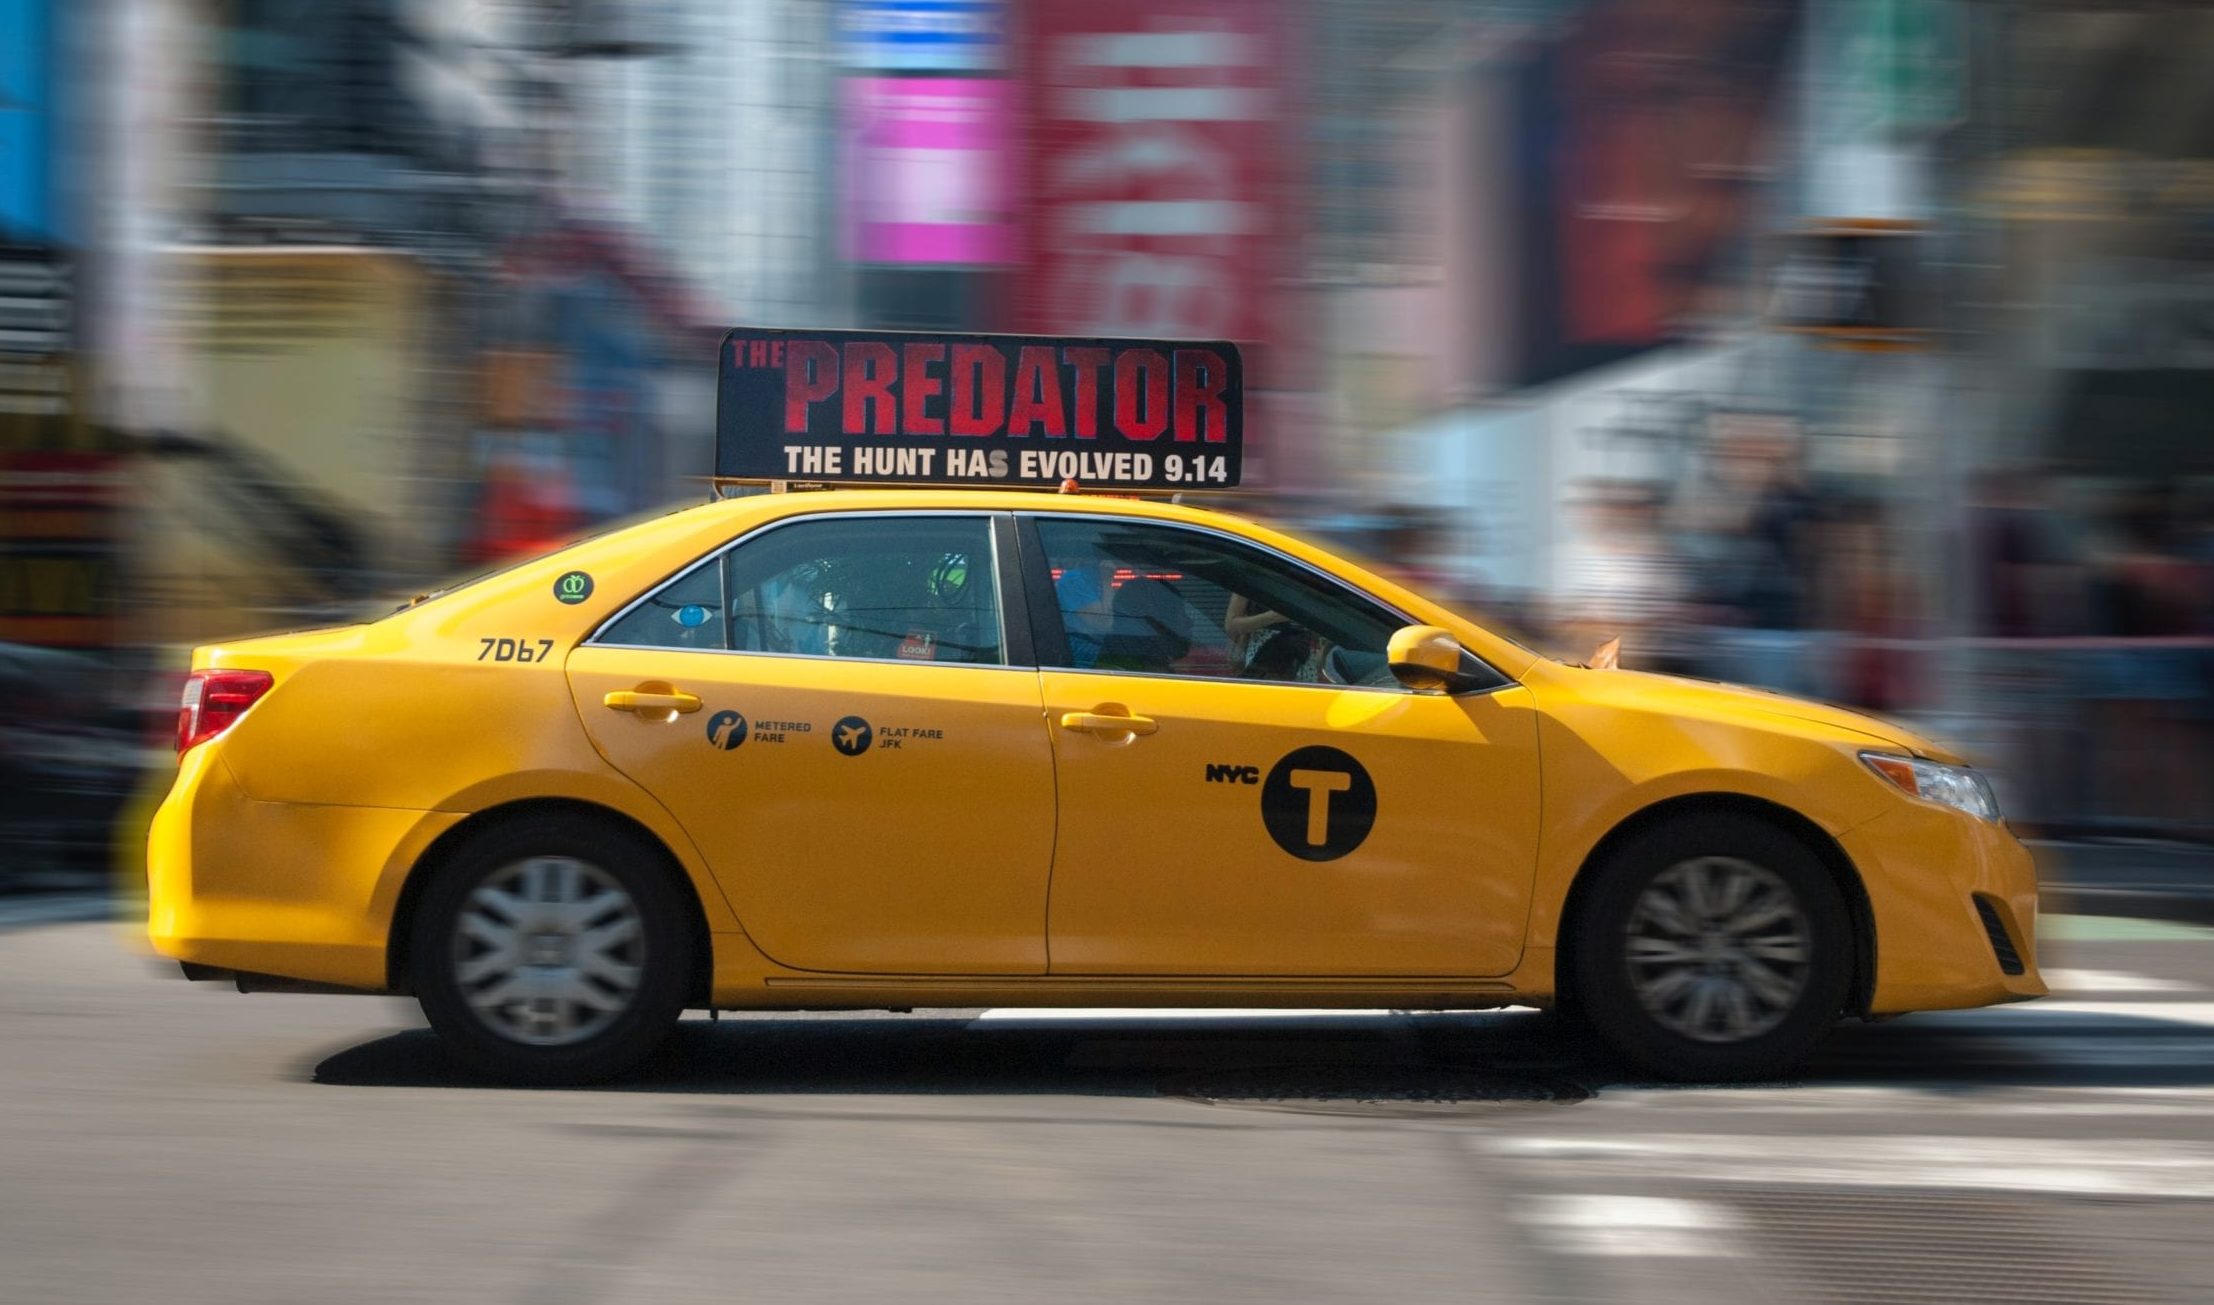 taxis-new-york-prices-and-information-about-taxis-in-new-york